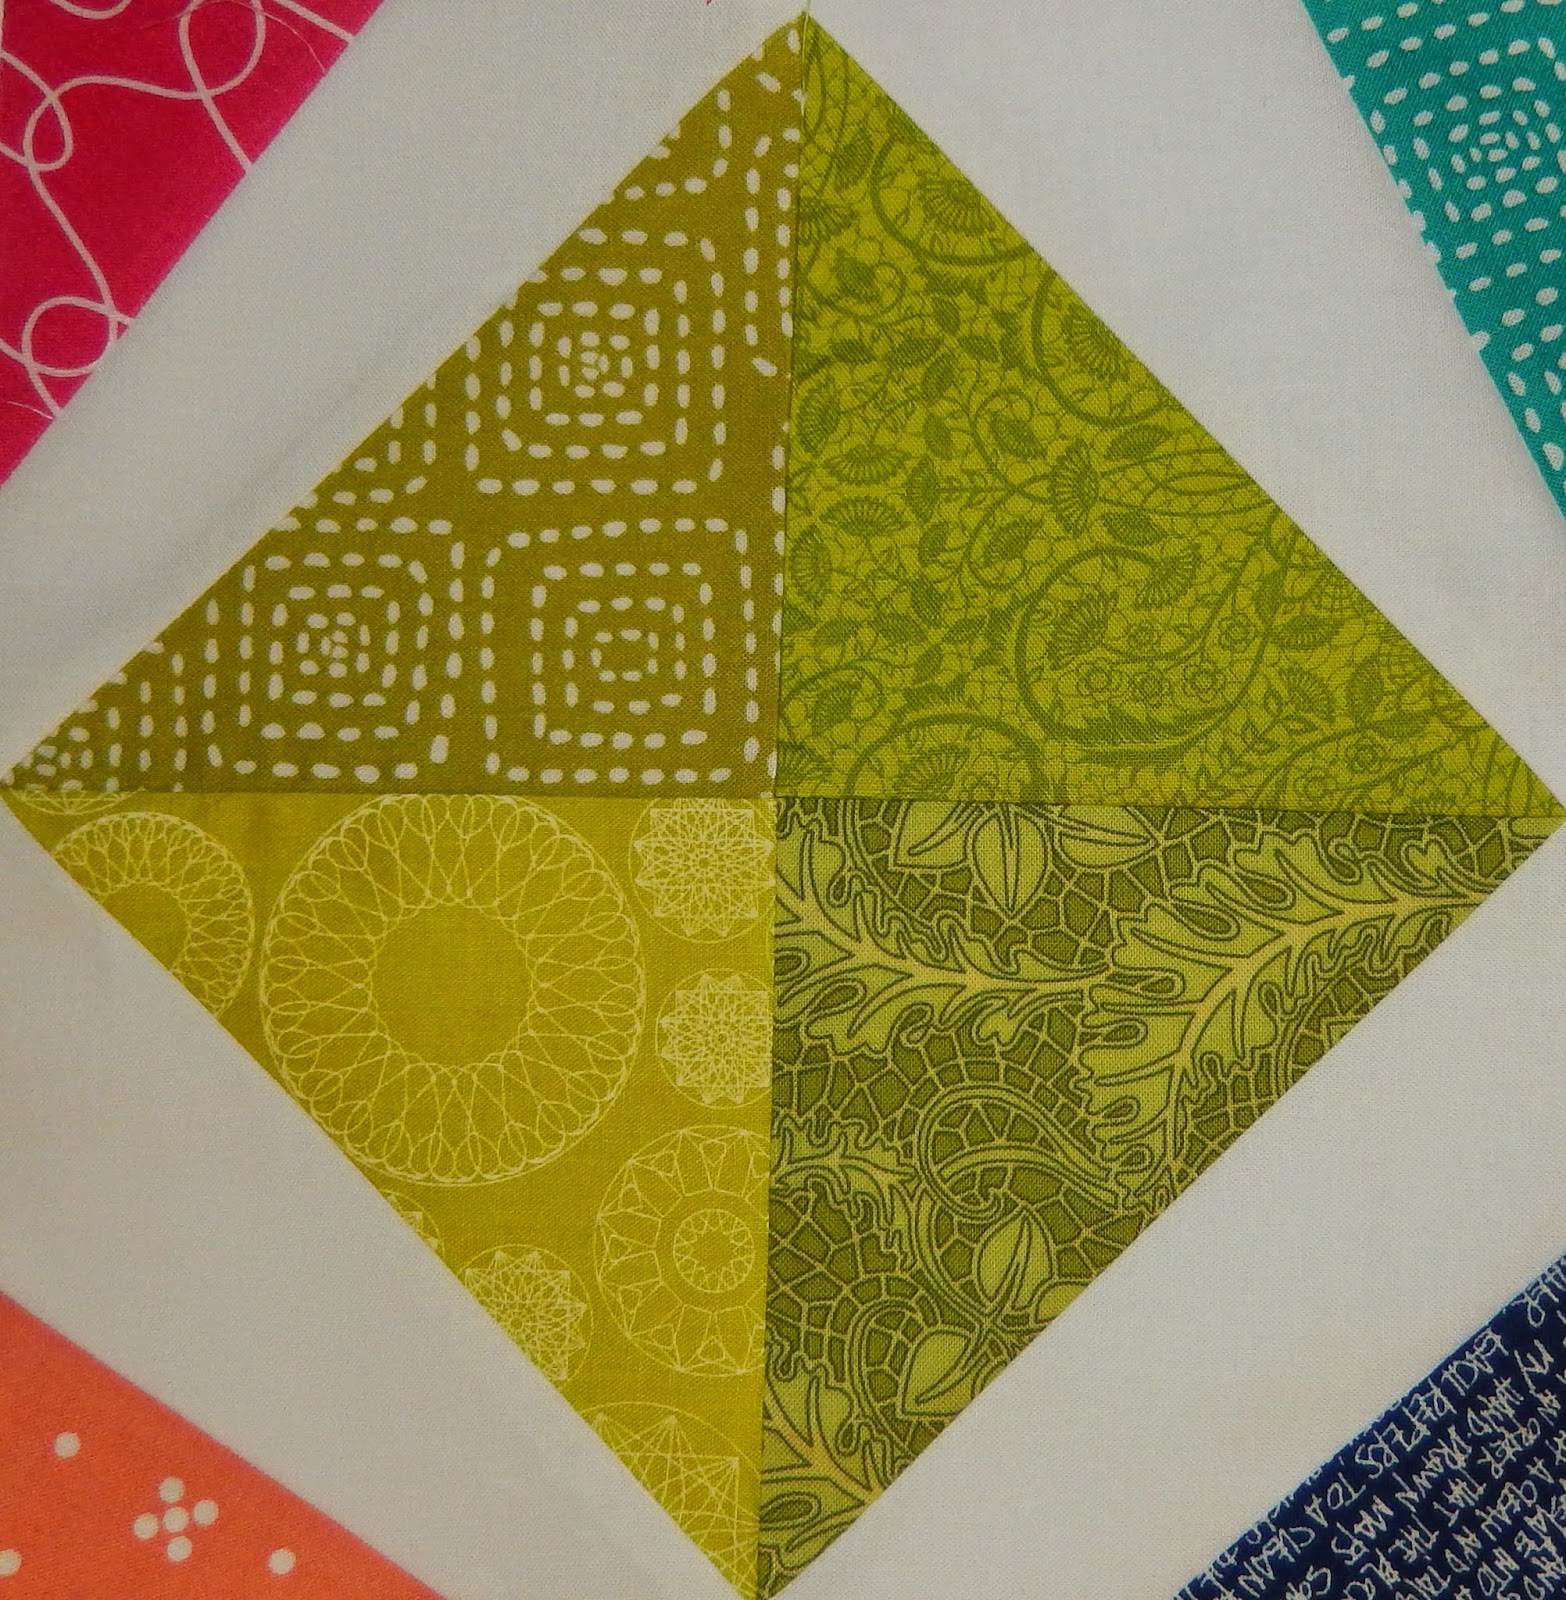 Hope Circle of Do. Good Stitches November @ Quilting Mod